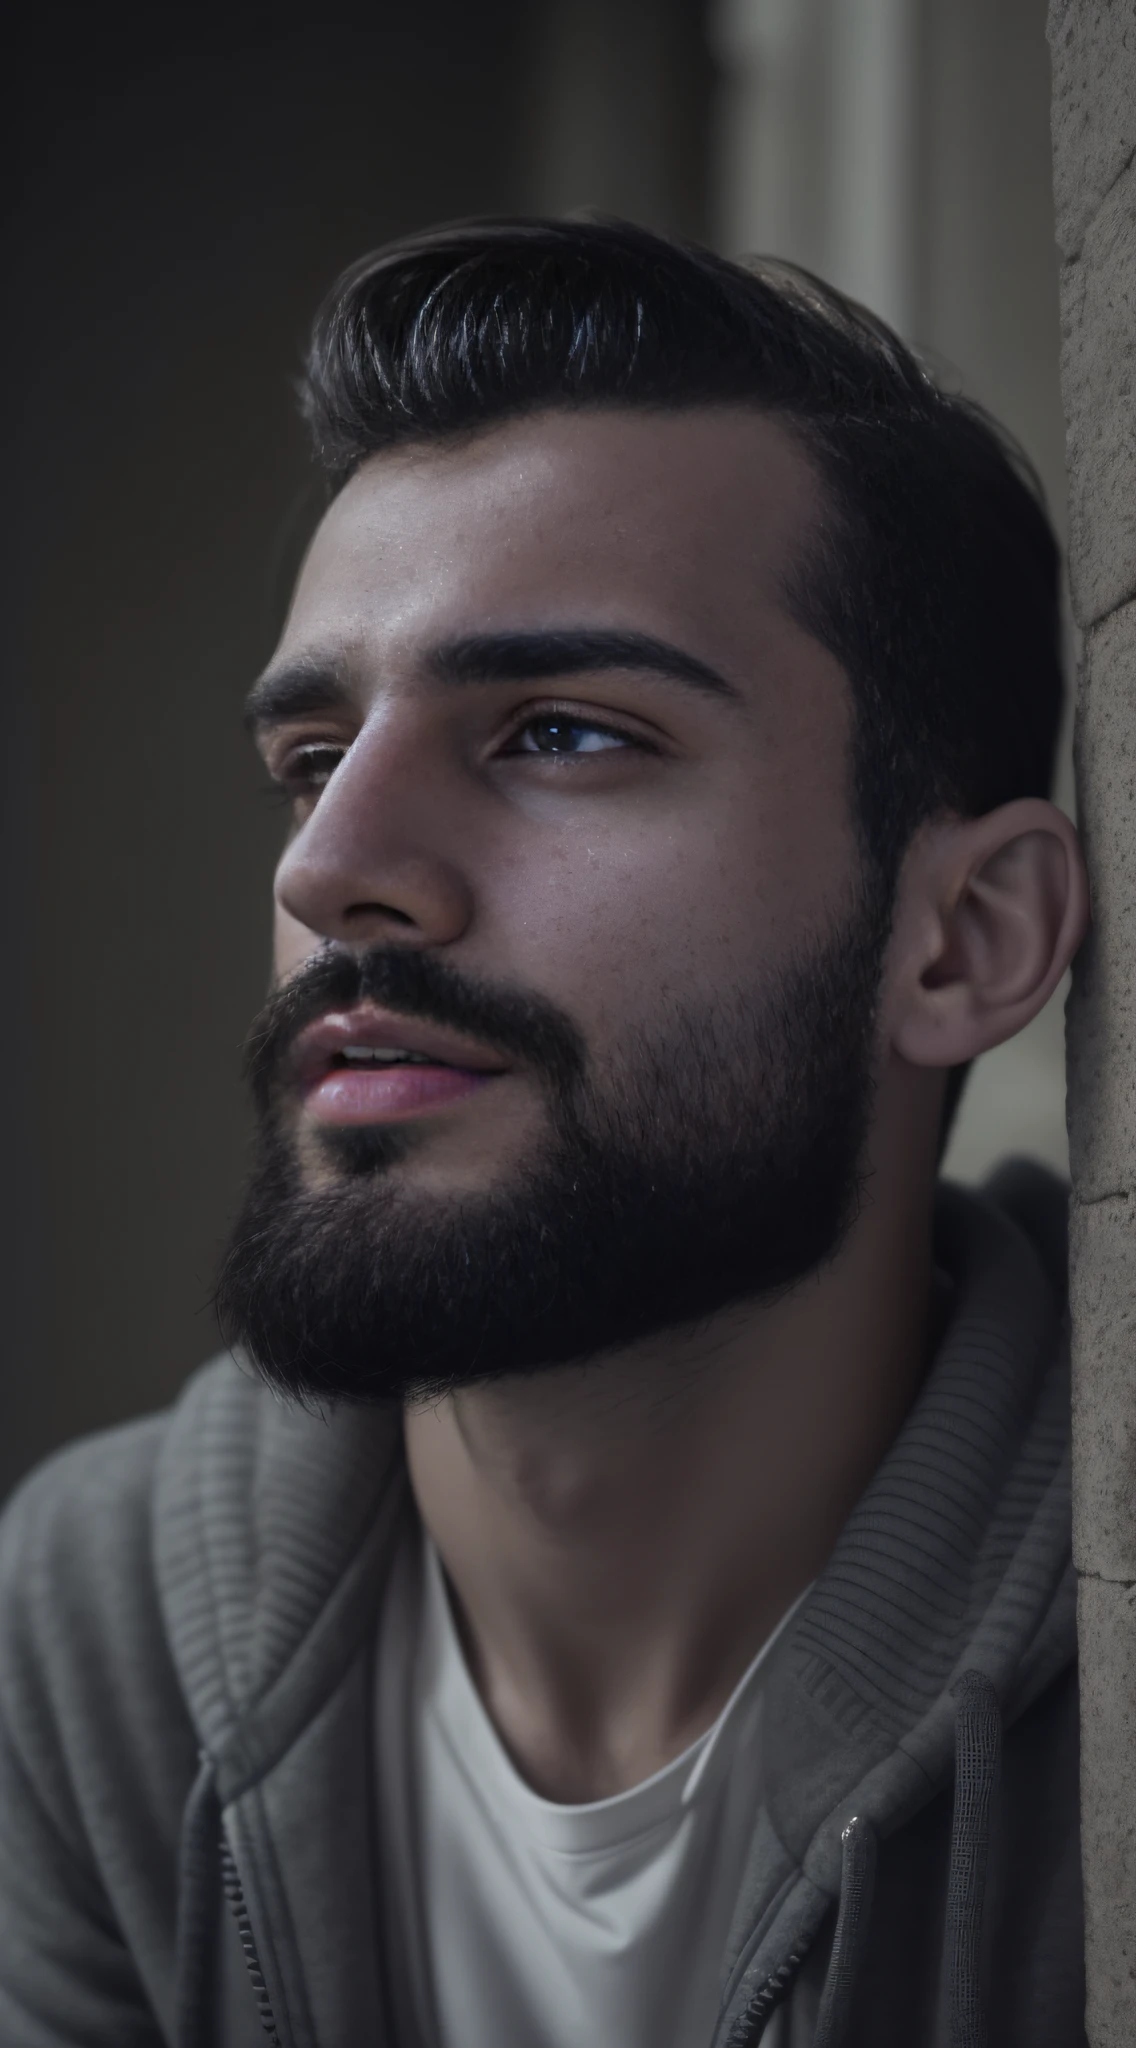 A 25-year-old man from Romania, masculine, bearded, full beard, role model, fully body, Very beauthful, looking-into-camera, detailled image, uhd, 8K, well-lit, grain of film